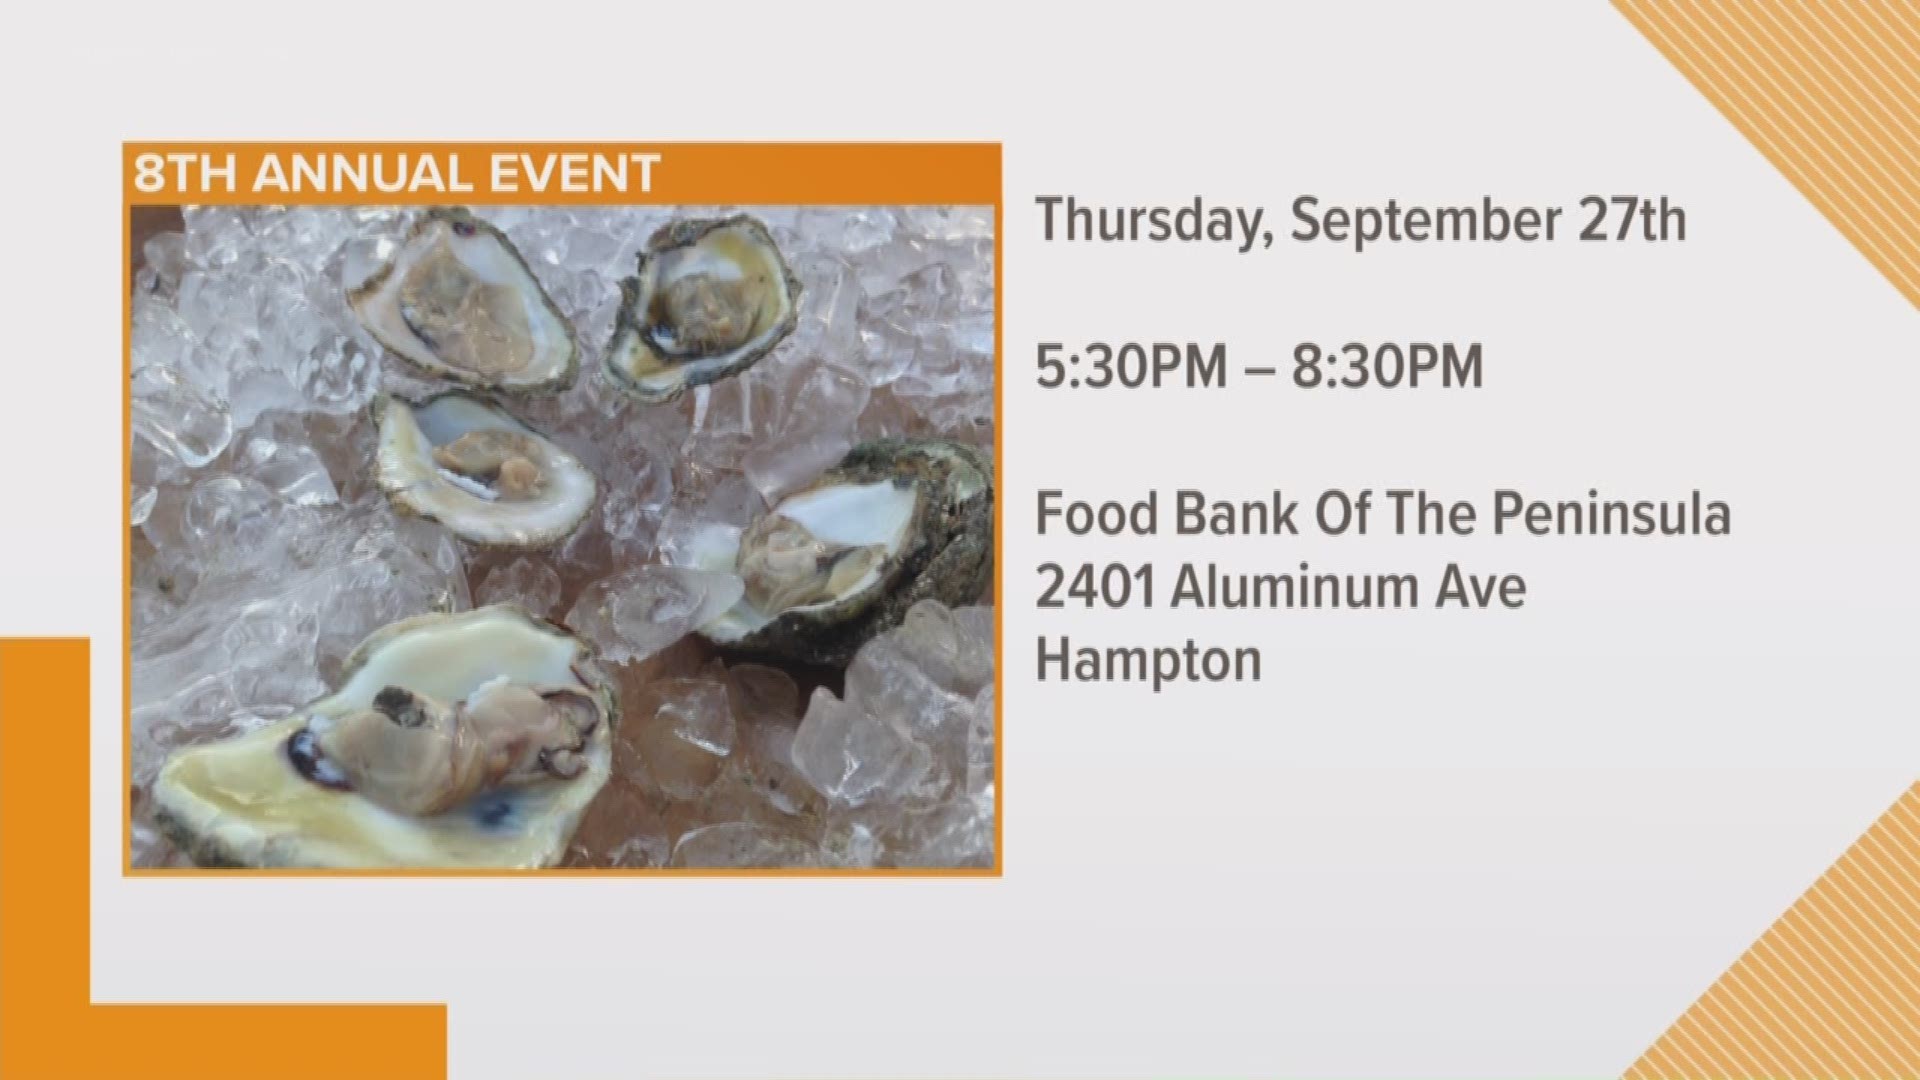 The Kiwanis Clubs of Division 13 is hosting its 8th Annual Shag at the Foodbank Seafood Festival on Sept. 27.